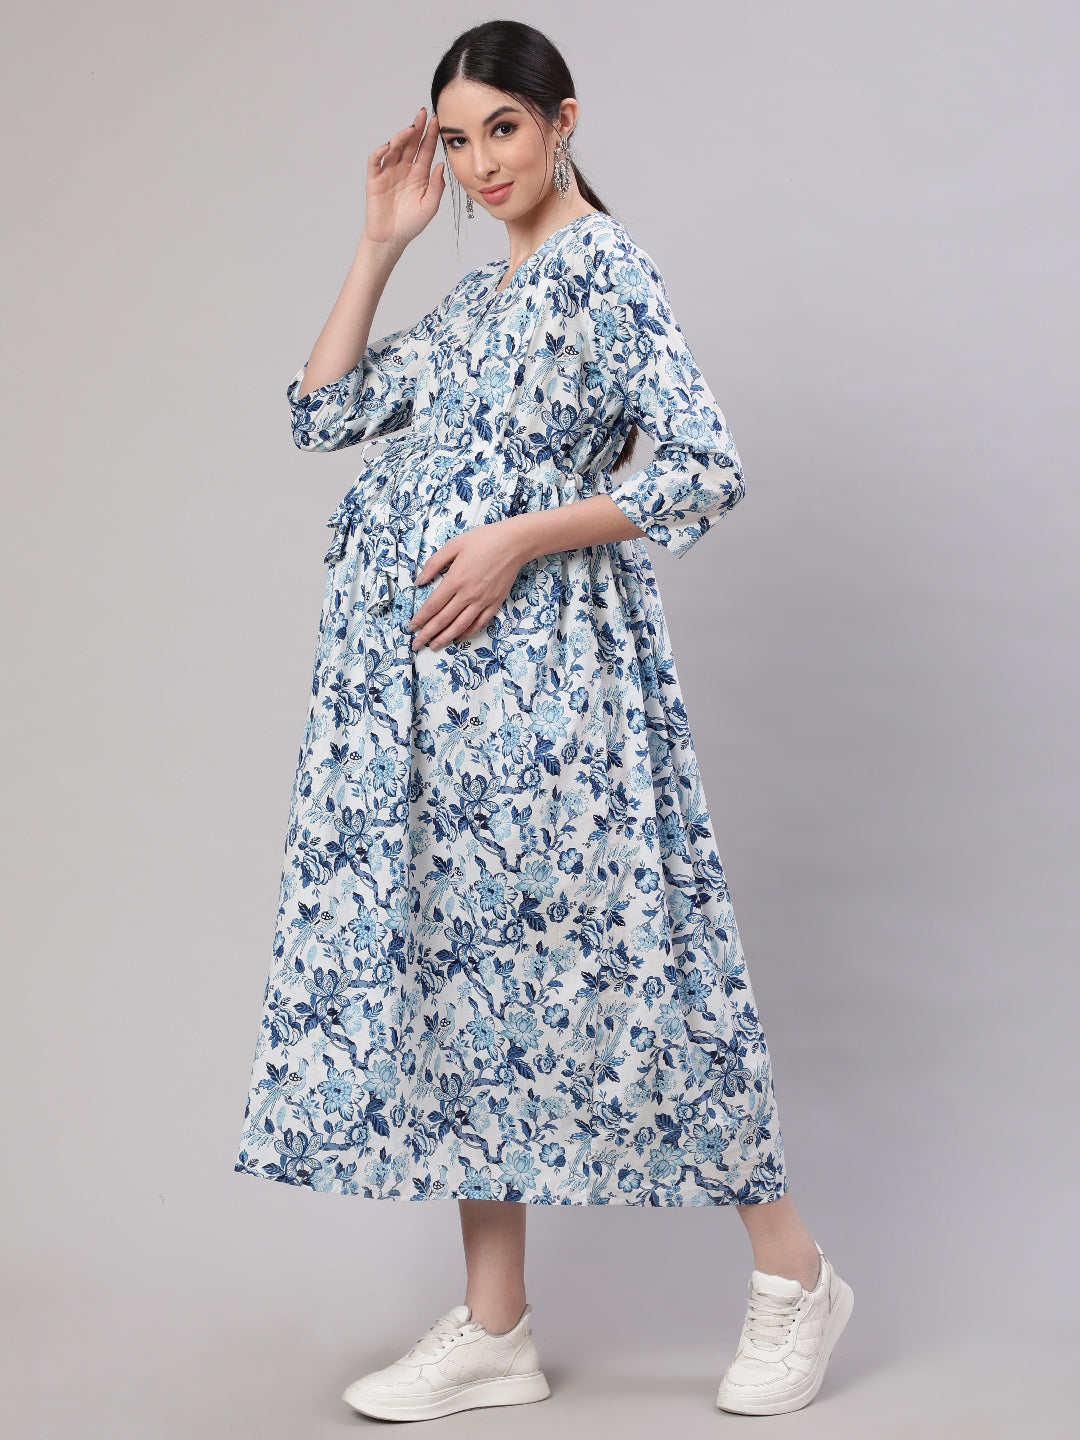 Women's Off White & Blue Floral Printed Maternity Dress With Three Quarter Sleeves - Nayo Clothing